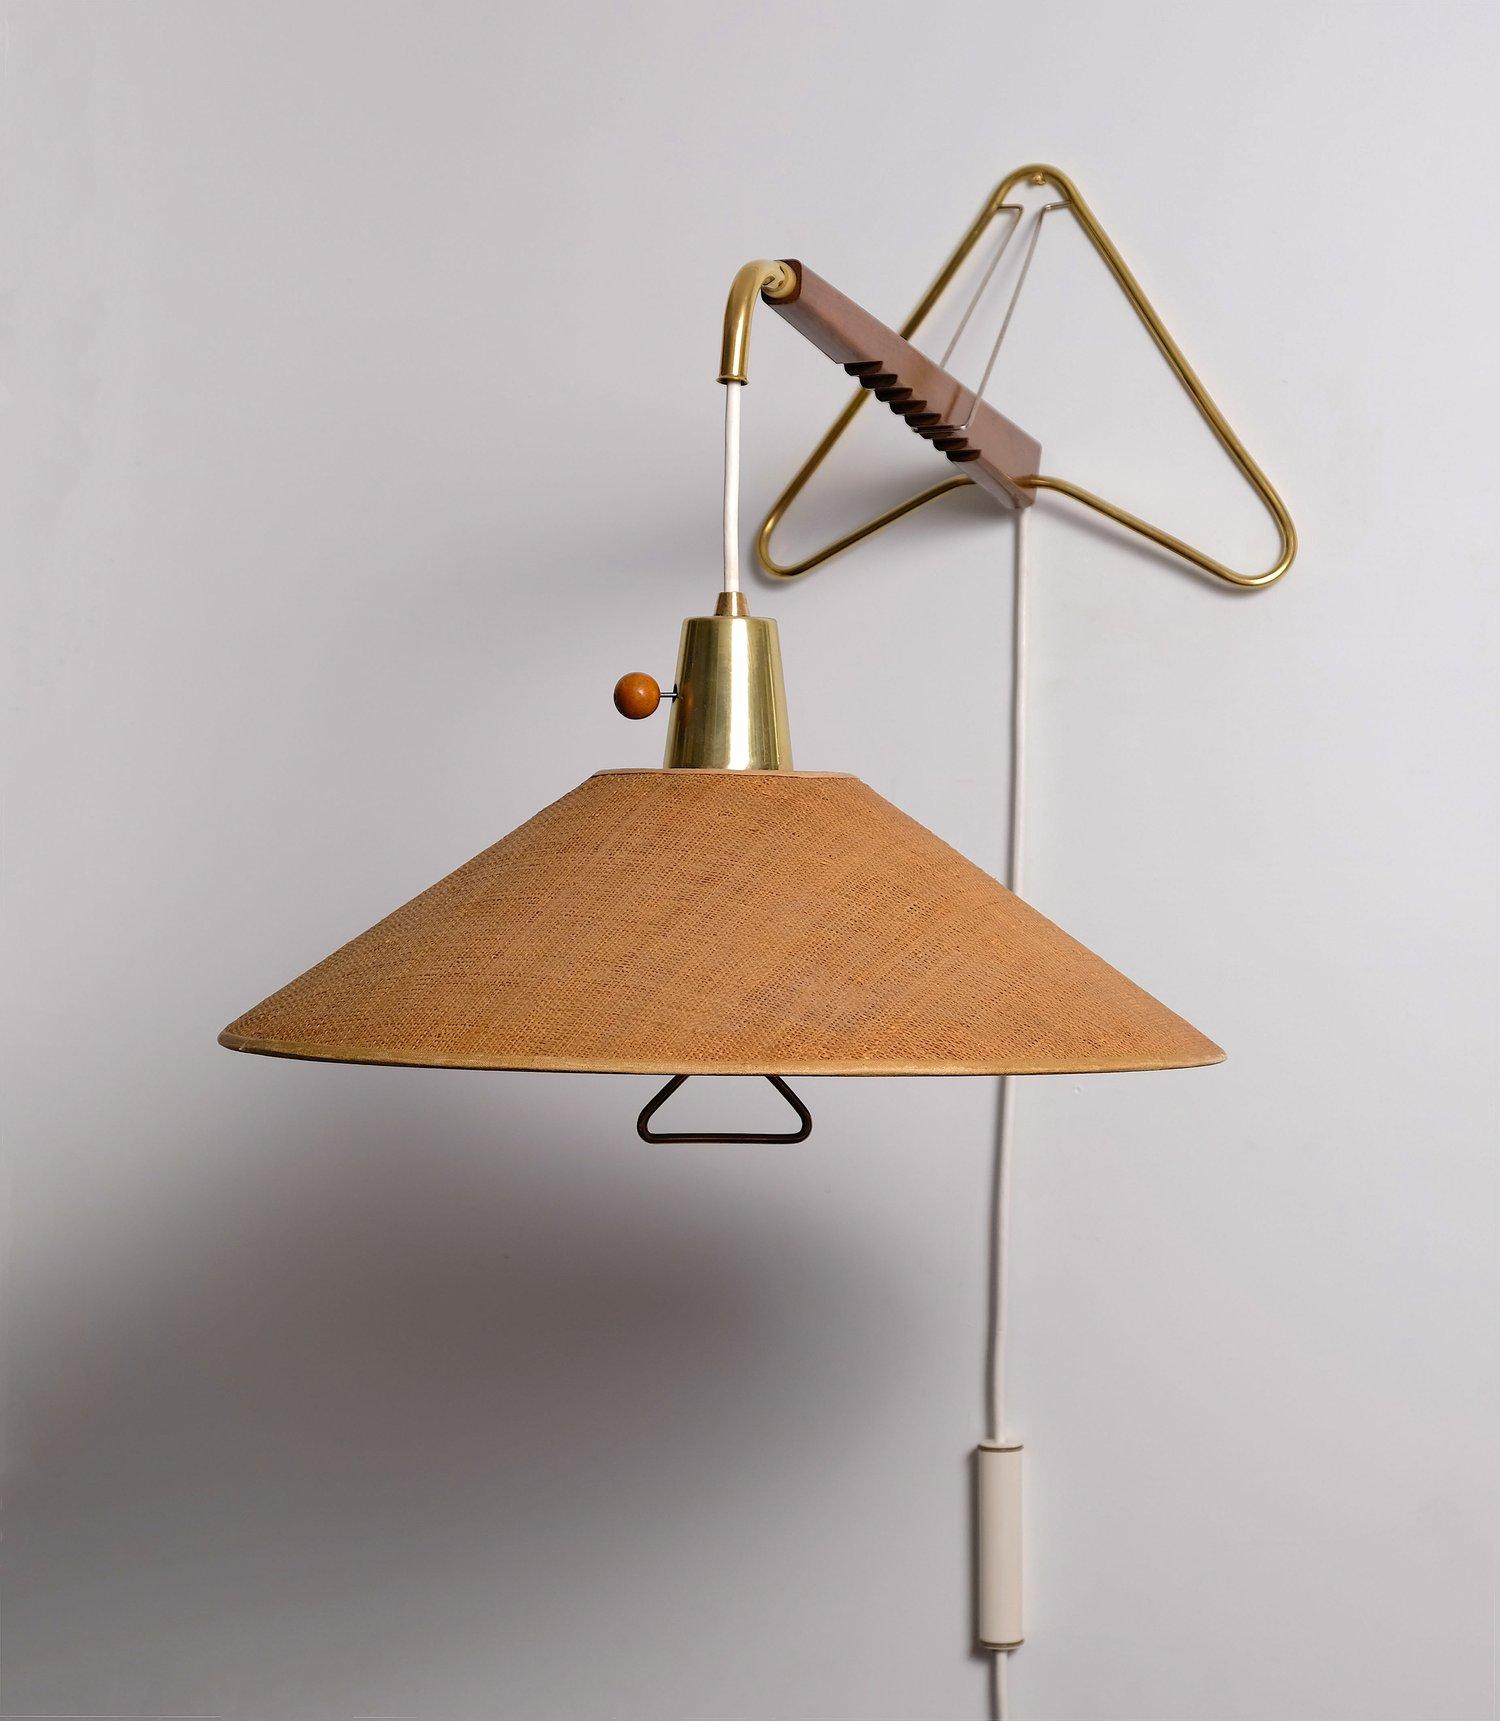 Rare Gerard Thurston extensible and adjustable wall lamp in walnut and brass with original raffia grass shade. The lamp can be extended by pulling out the brass arm and the angle can be adjusted with the notched wall bracket.  Includes a pierced